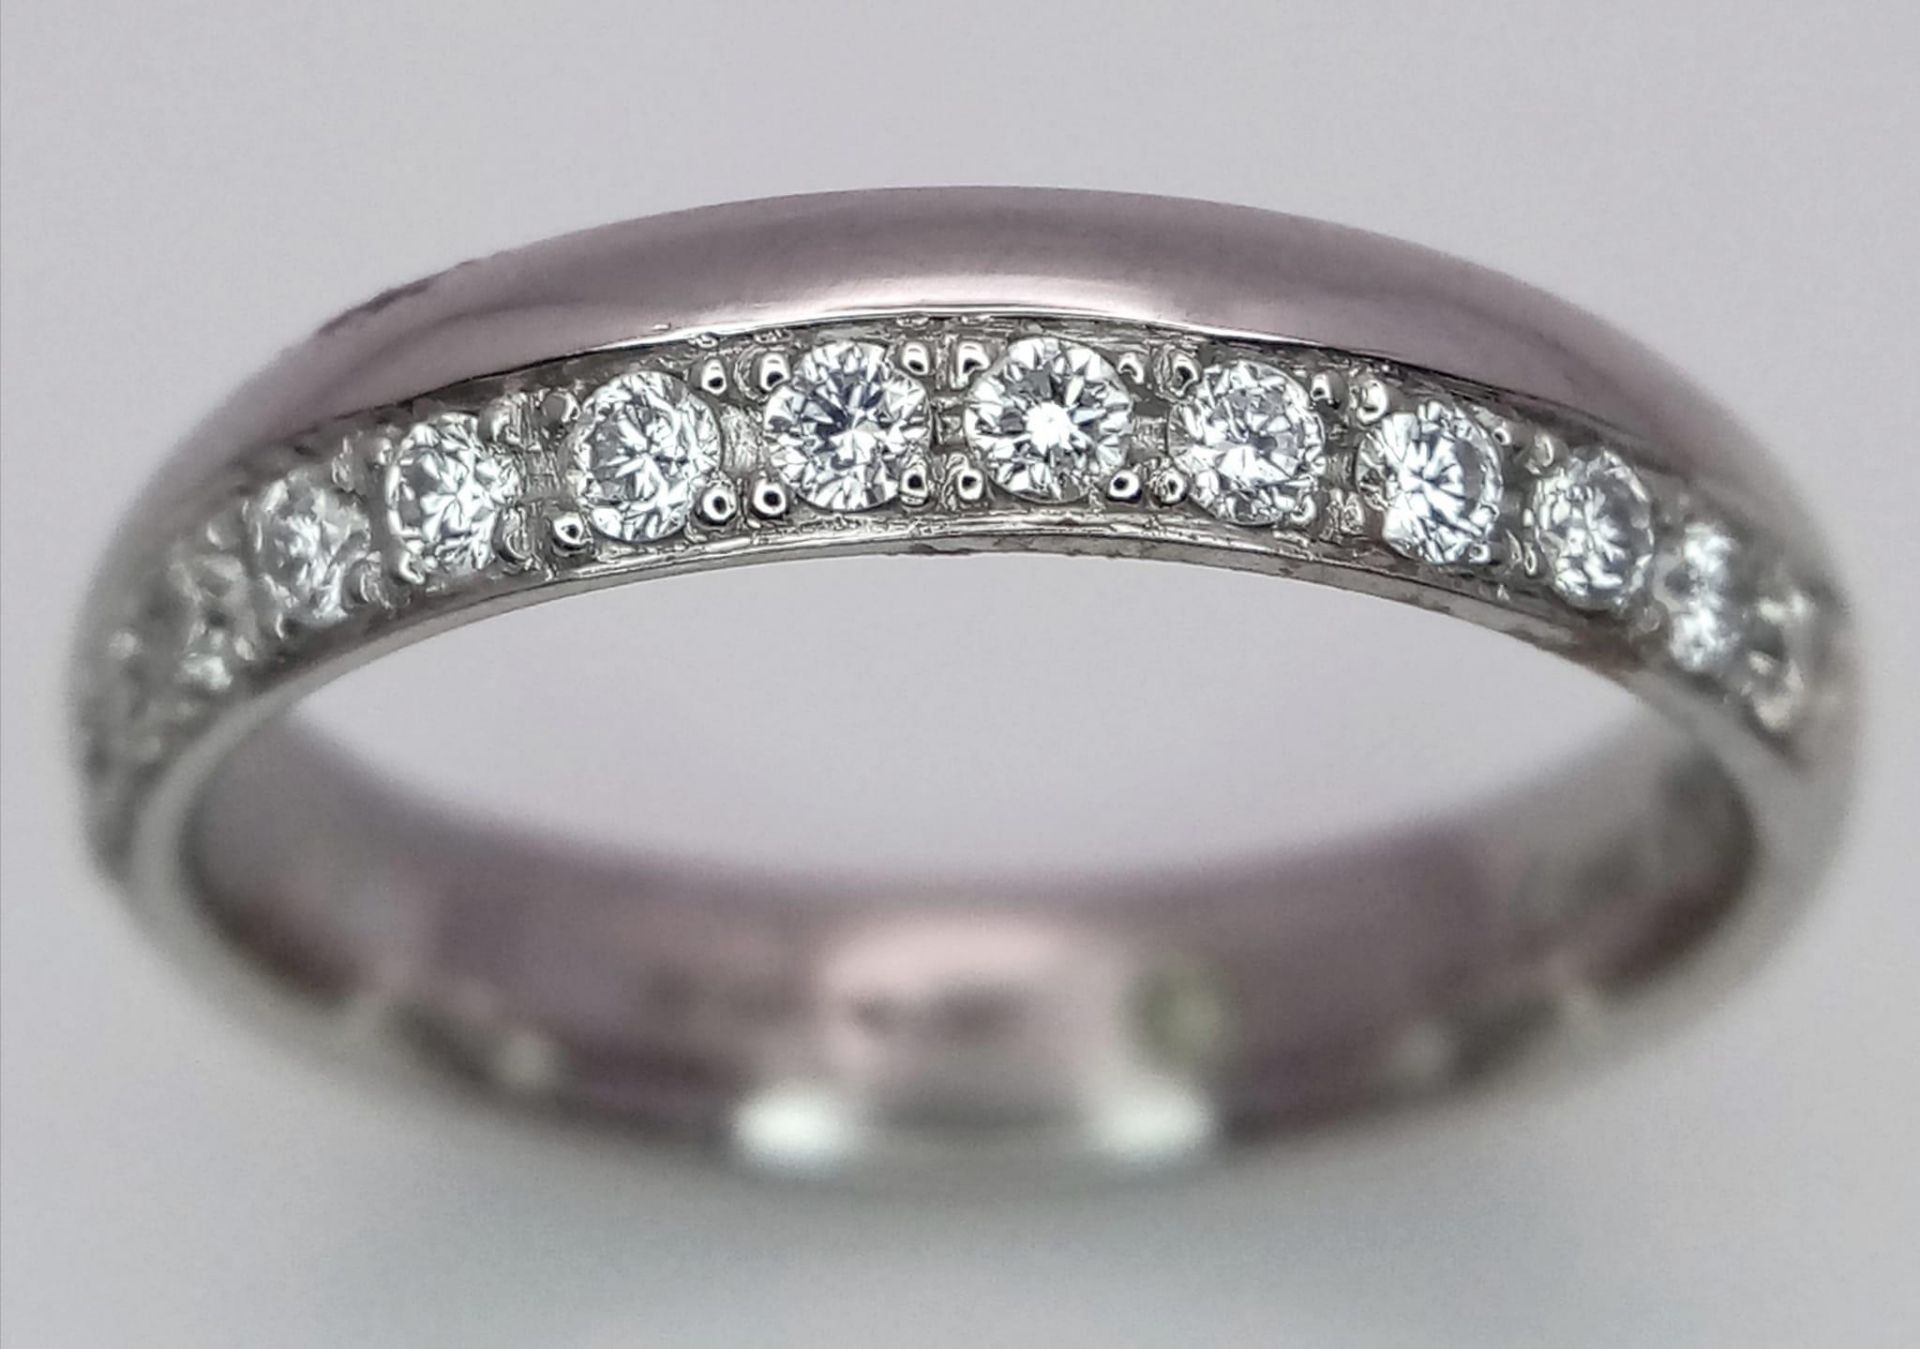 A 950 Platinum Diamond Half Eternity Ring. Size M/N. 6.5g total weight. Ref: 15813 - Image 2 of 4